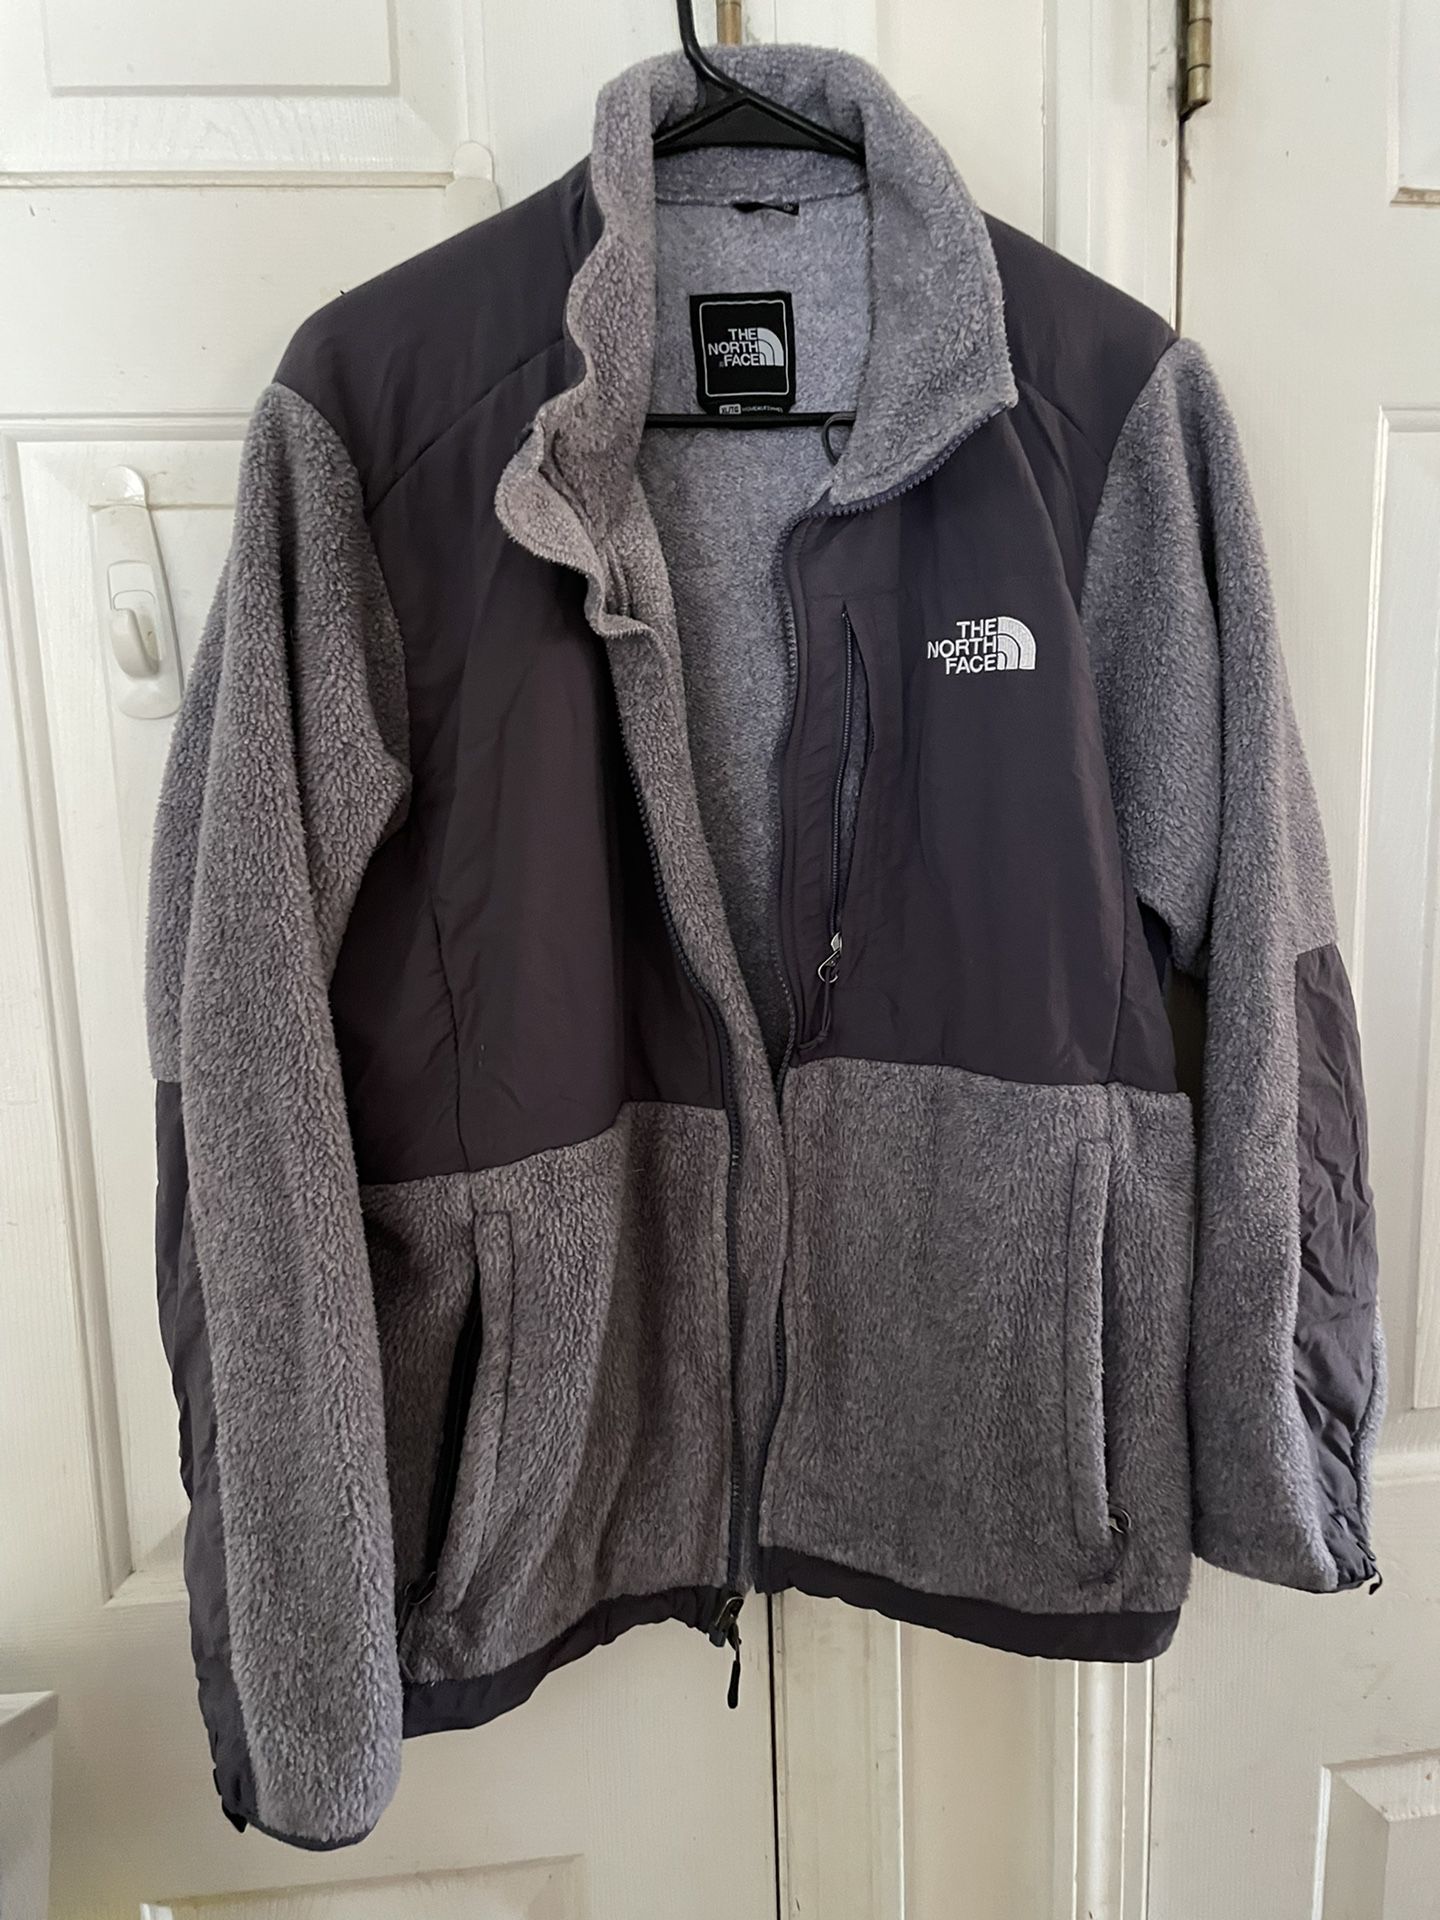 Authentic North Face Color Heather Gray Fleece  Xlarge 